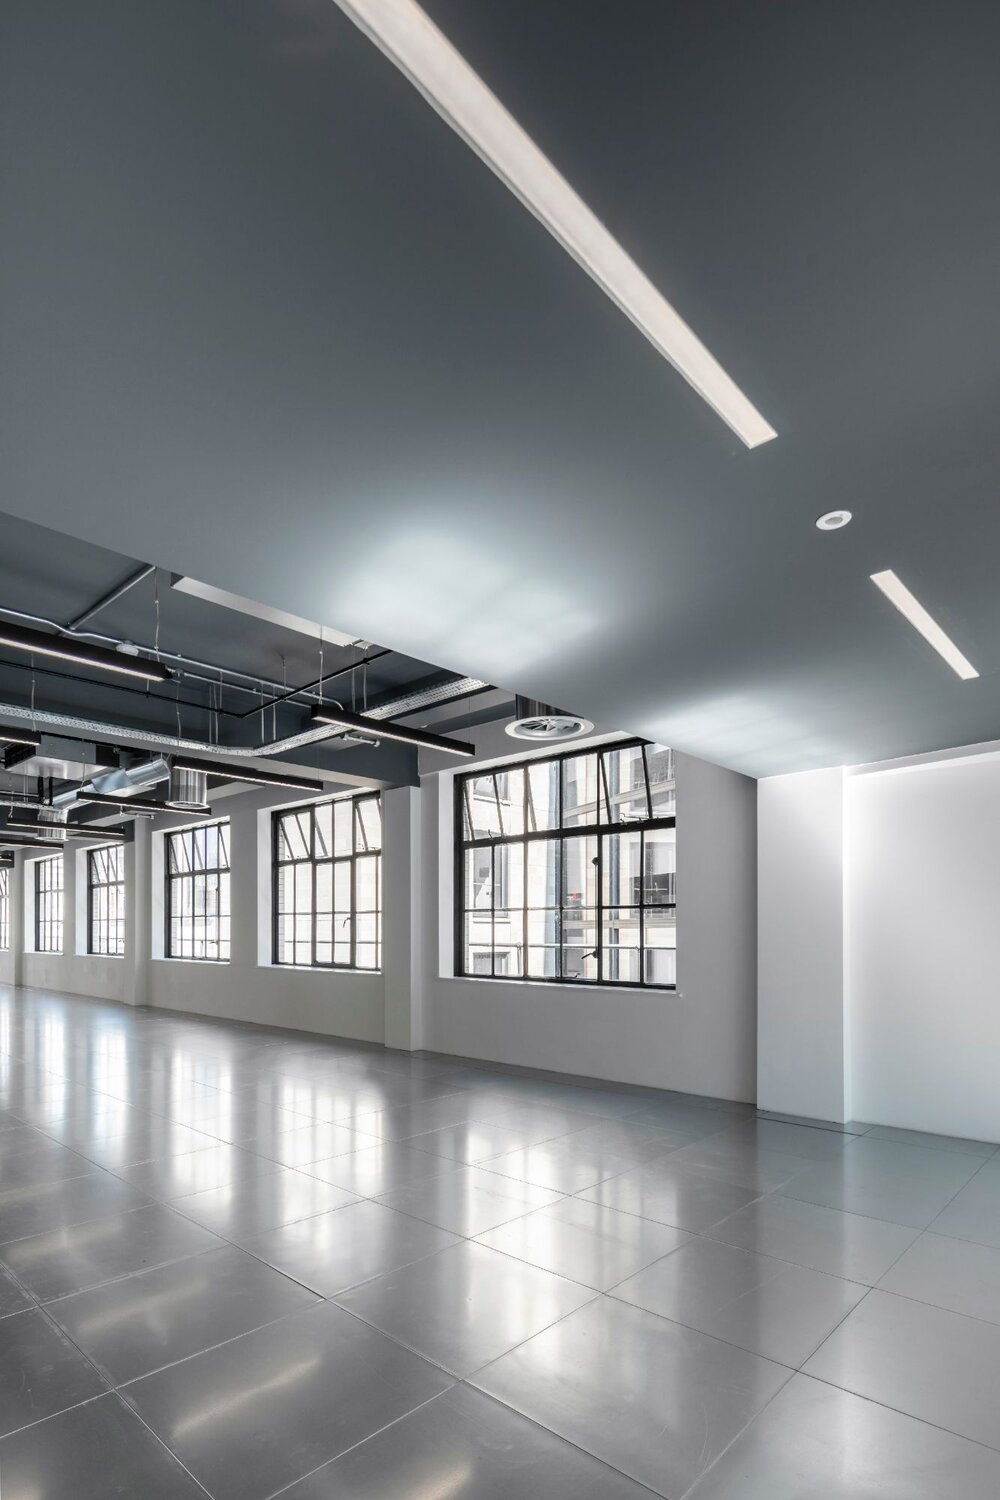 Office lighting for an industrial style CAT A fitout at 11 Old Jewry, London.